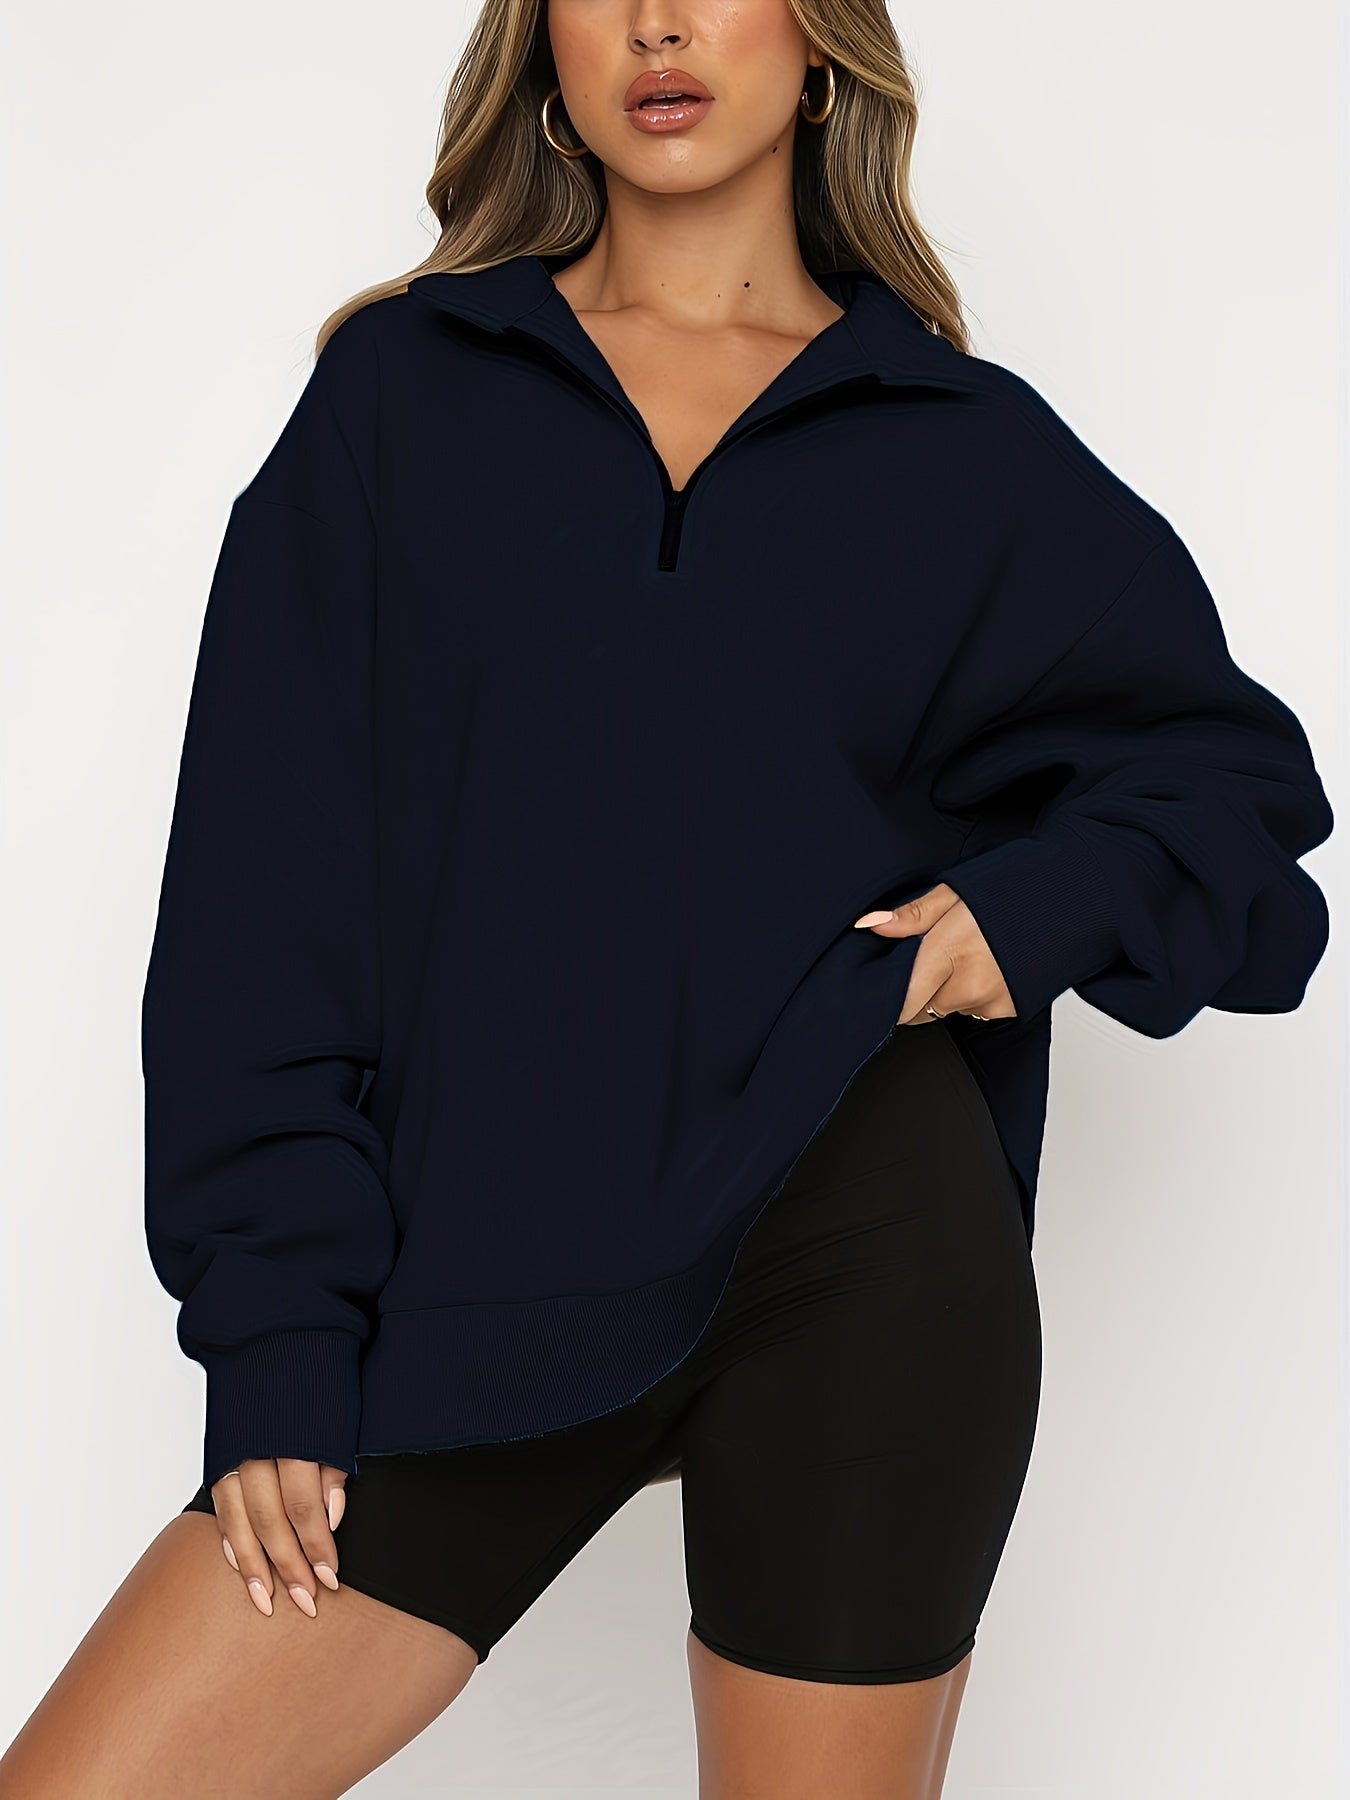 Plus Size Casual Sweatshirt, Women's Plus Solid Long Sleeve Zip Up Lapel Collar Pullover Sweatshirt, Casual Tops For Fall & Winter, Women's Clothing